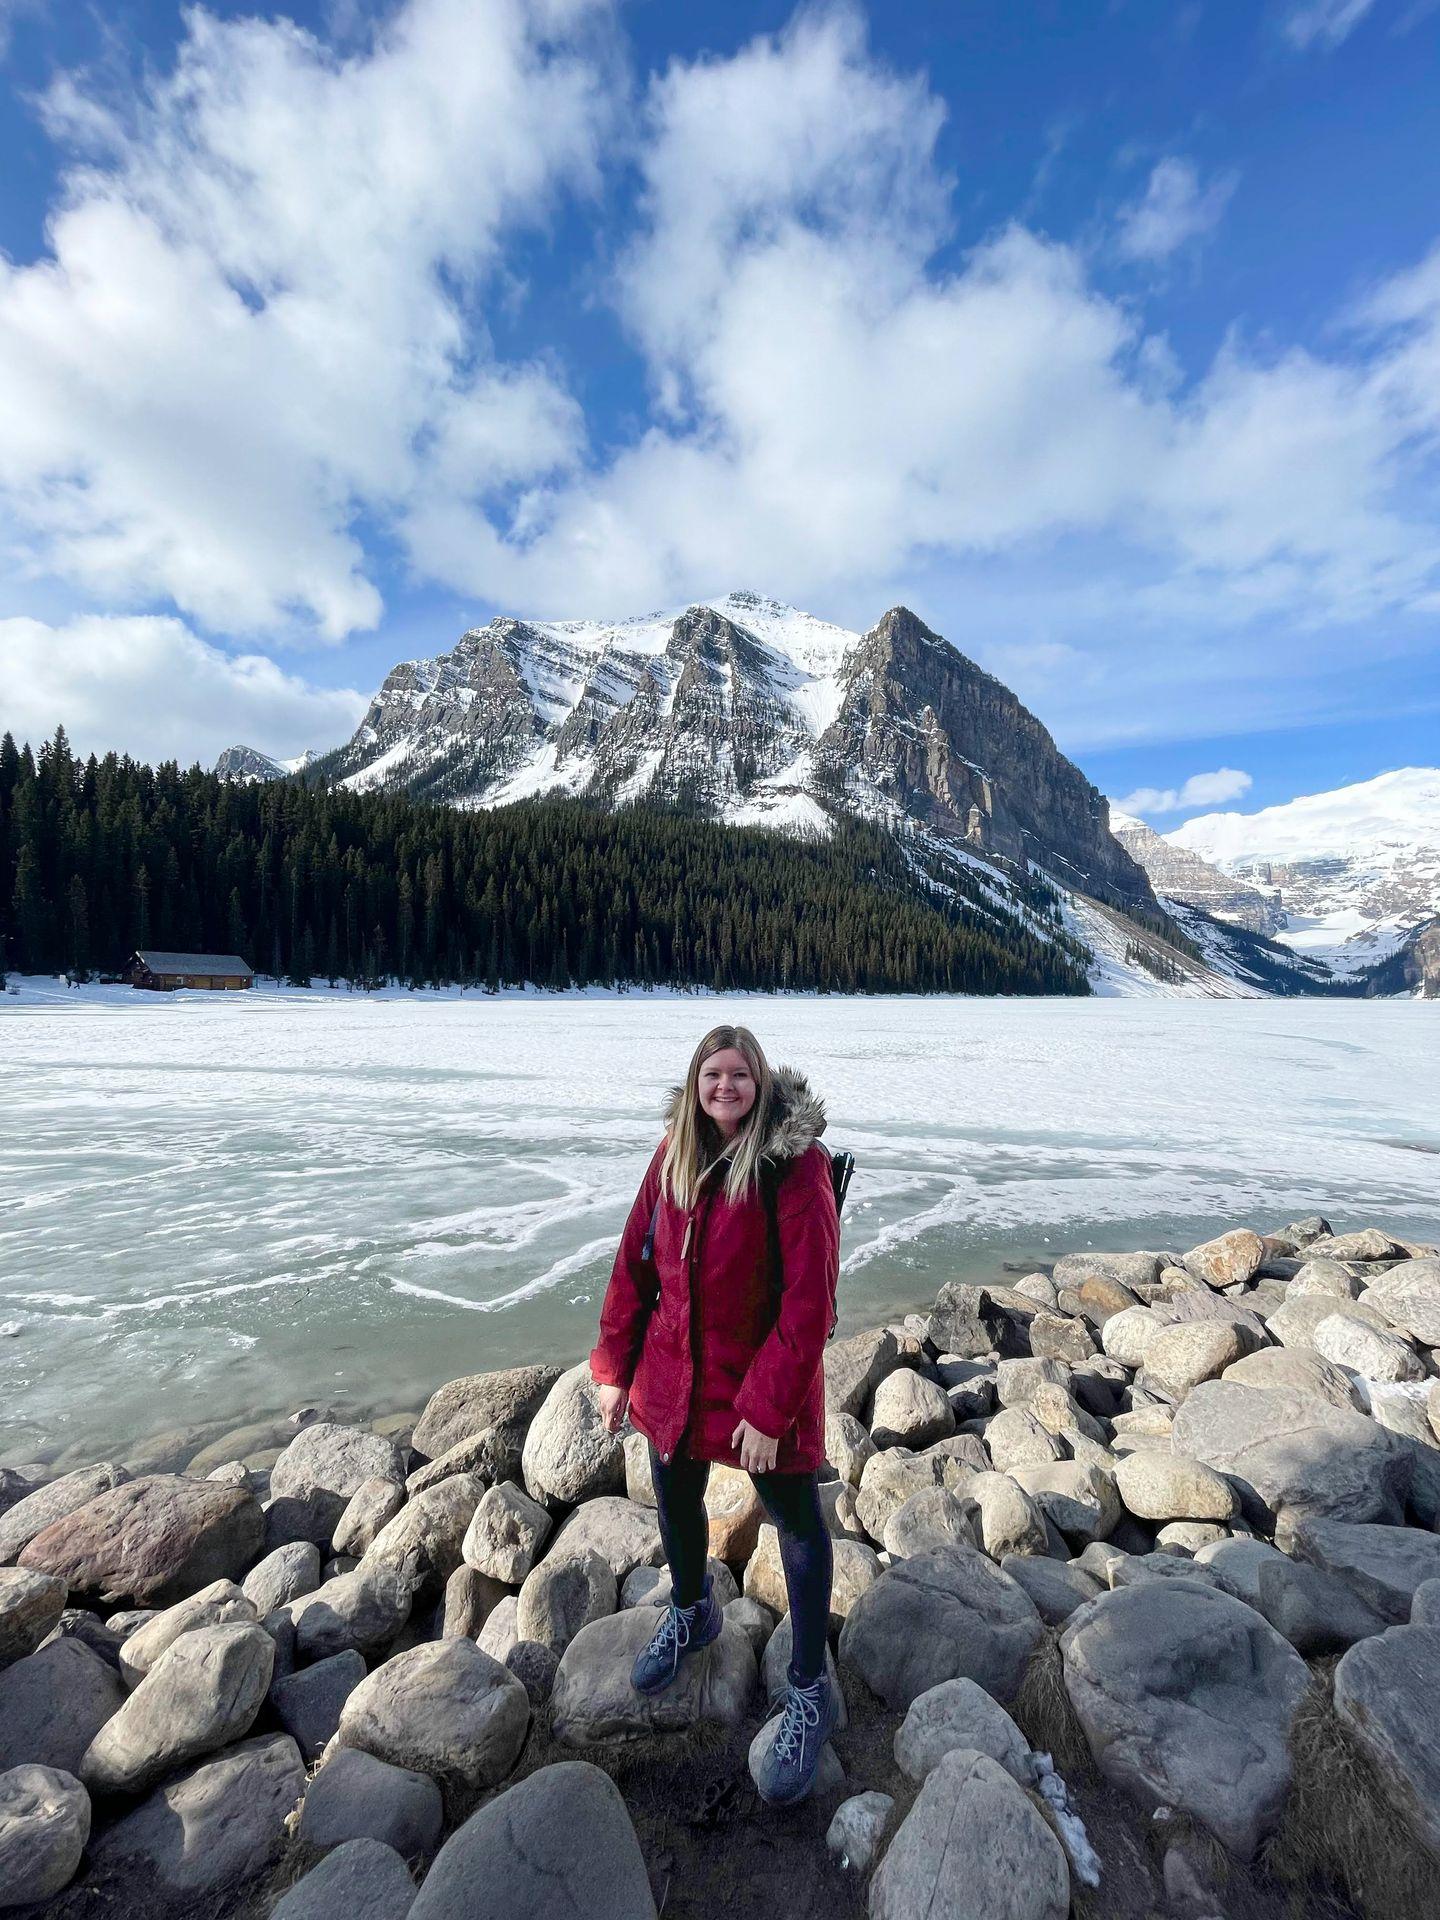 Lydia standing in front of a frozen lake. There are large mountains across the lake.